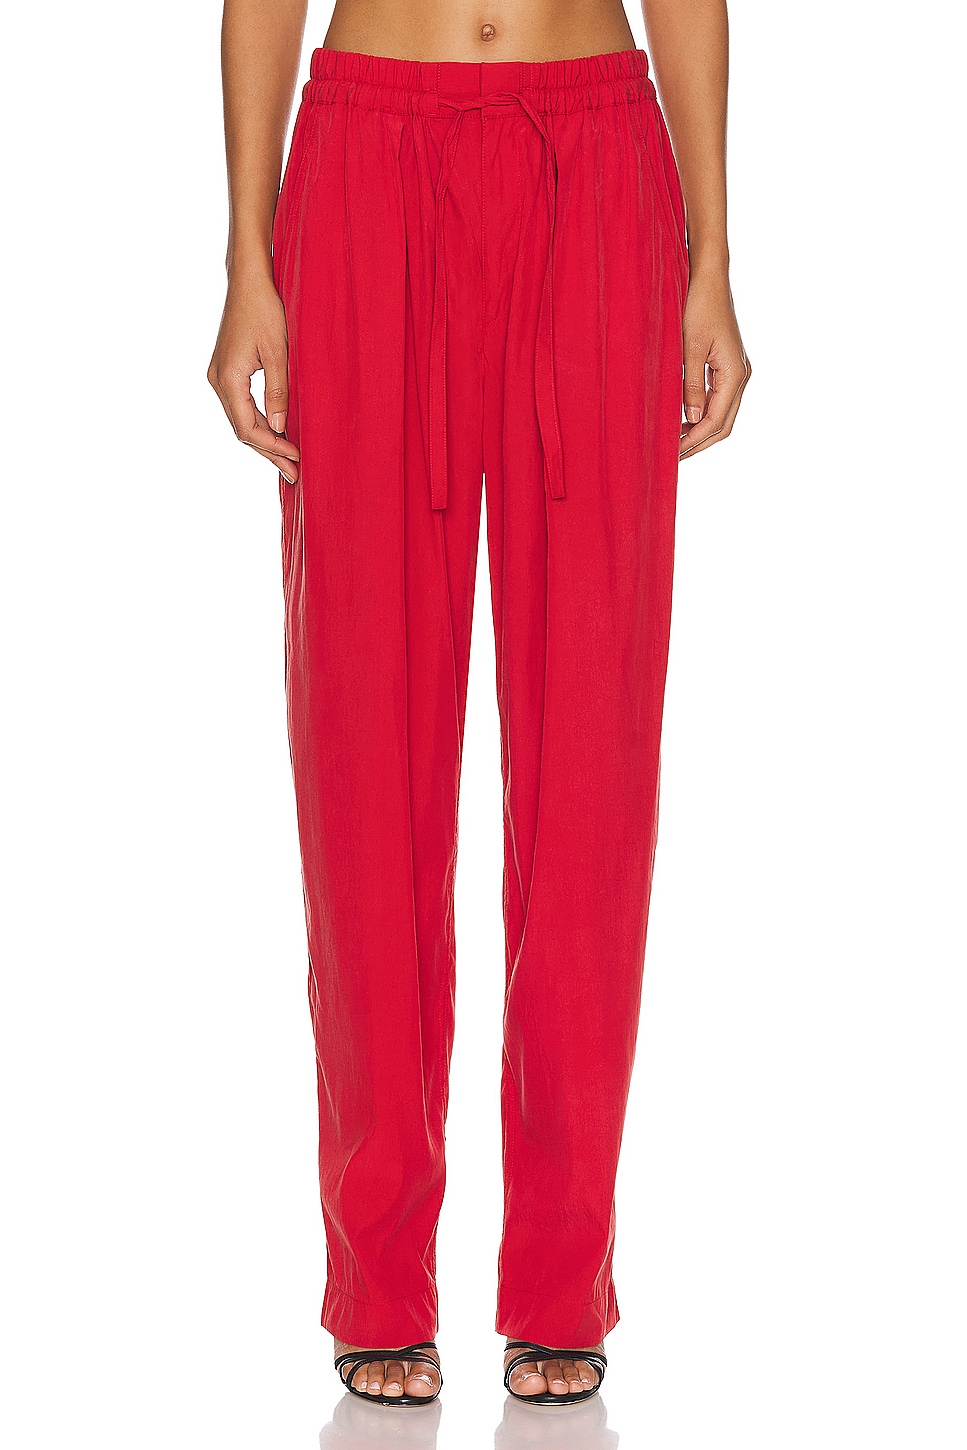 Image 1 of Isabel Marant Hectorina Pant in Scarlet Red